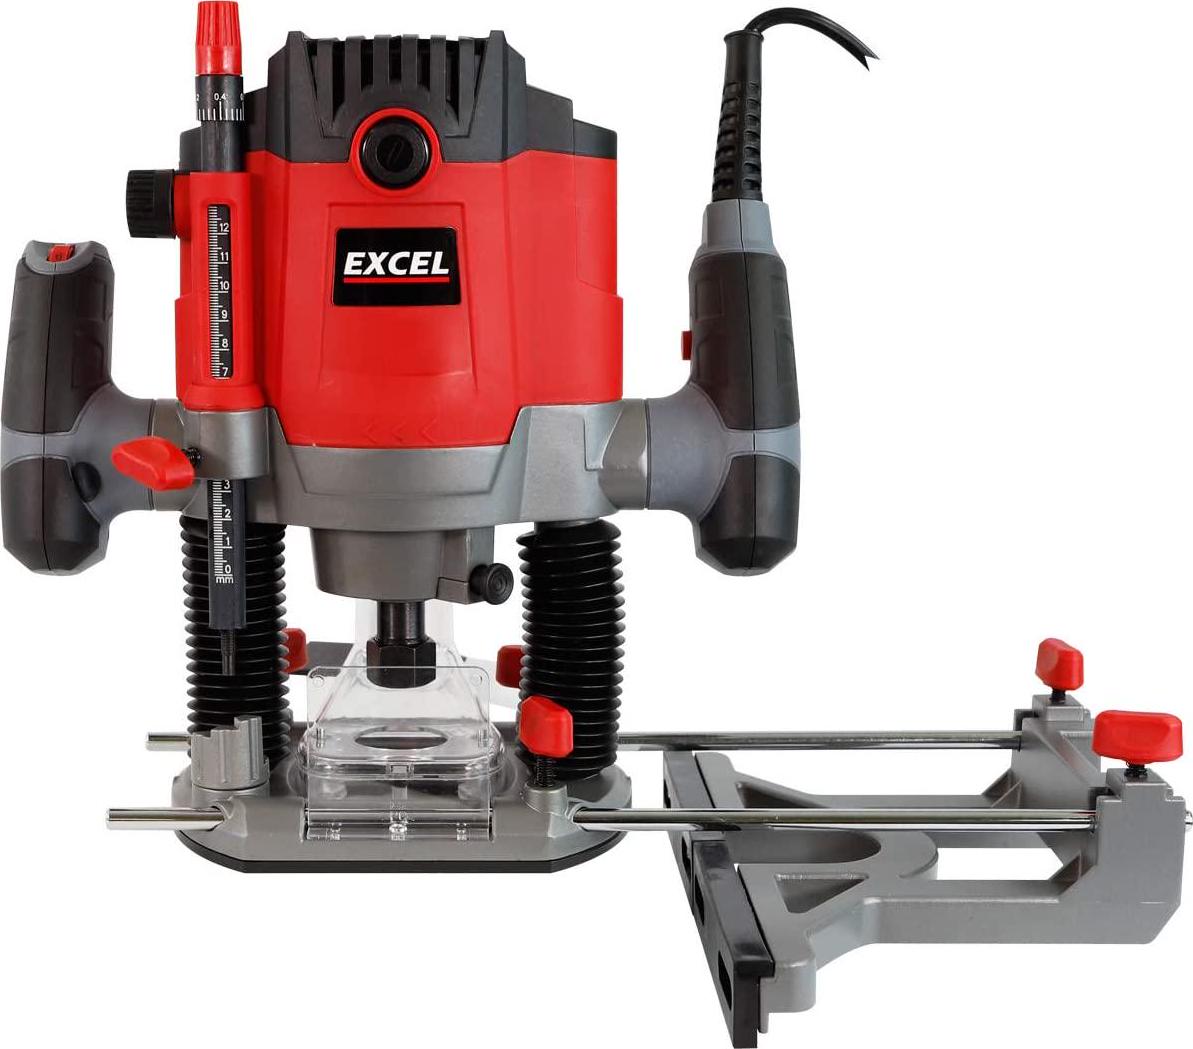 Excel, Excel 1/2 Electric Plunge Router Heavy Duty 1800W/230V ~ 50Hz with Variable Speed 22000RPM - Parallel Side-Fence - 2 x Guide Rods - Dust Extraction - 7 Speed presets - UK Plug